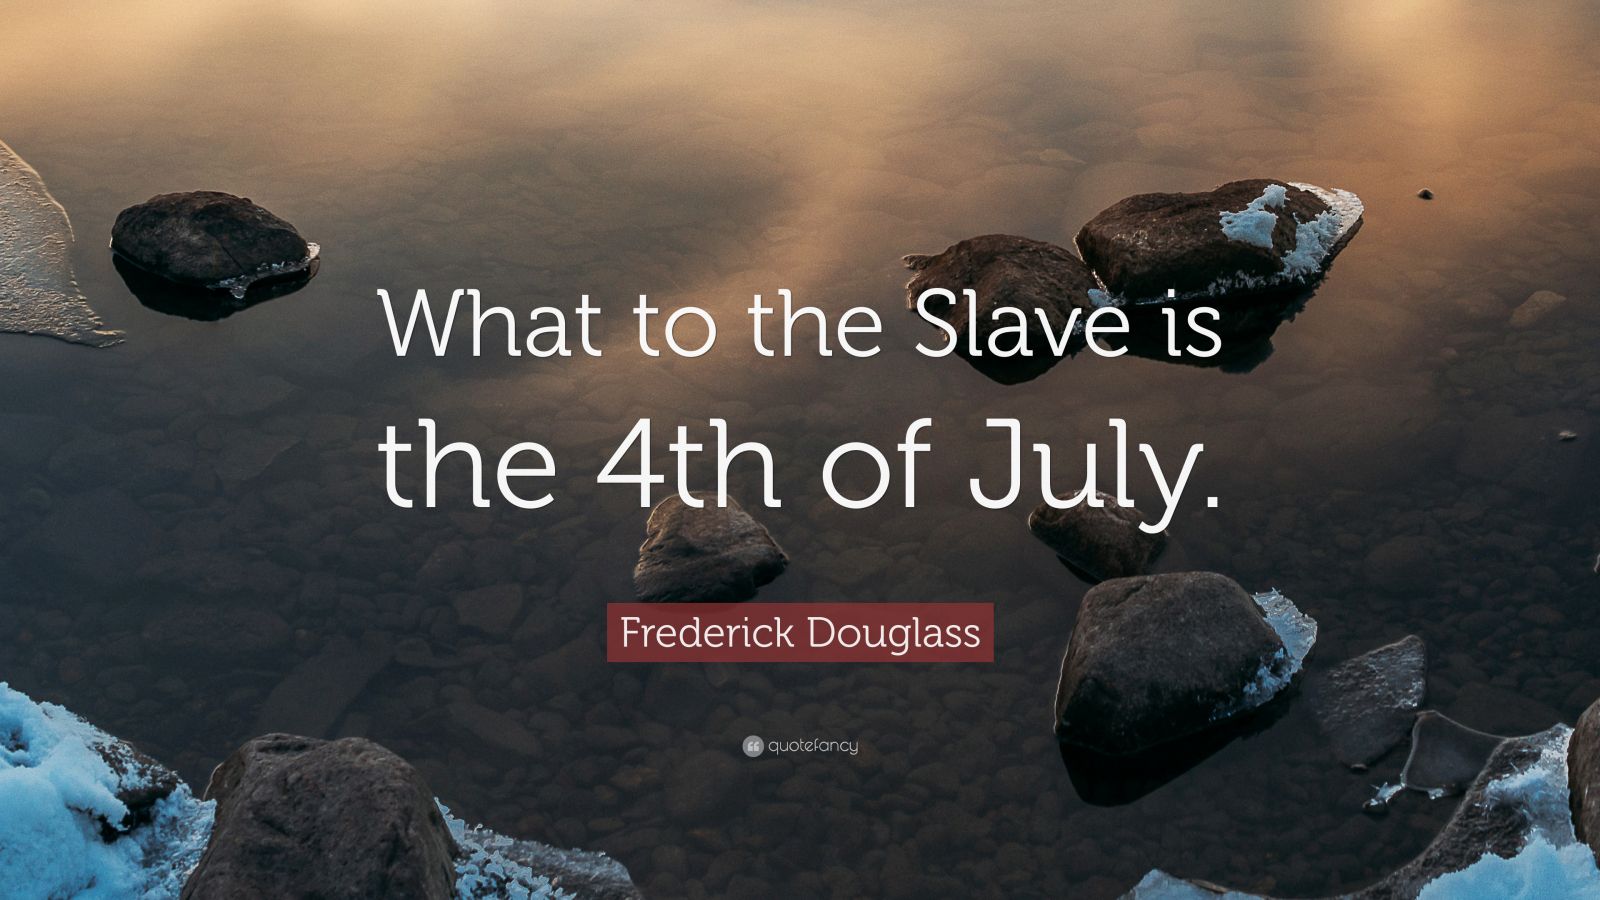 Frederick Douglass Quote “what To The Slave Is The 4th Of July” 12 Wallpapers Quotefancy 